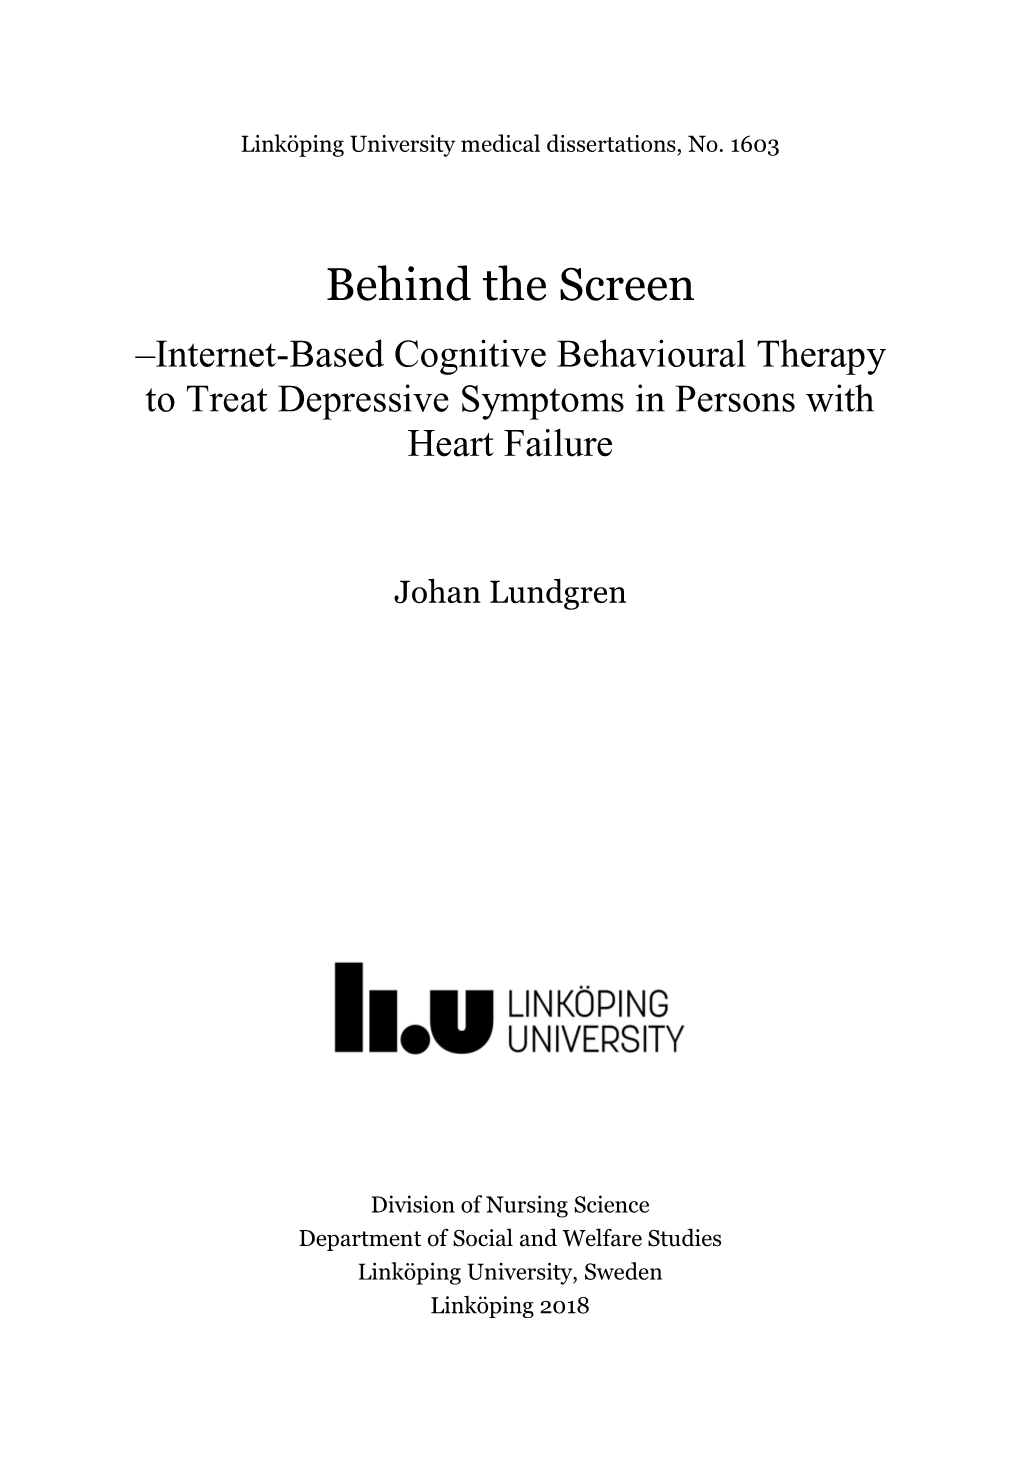 Internet-Based Cognitive Behavioural Therapy to Treat Depressive Symptoms in Persons with Heart Failure